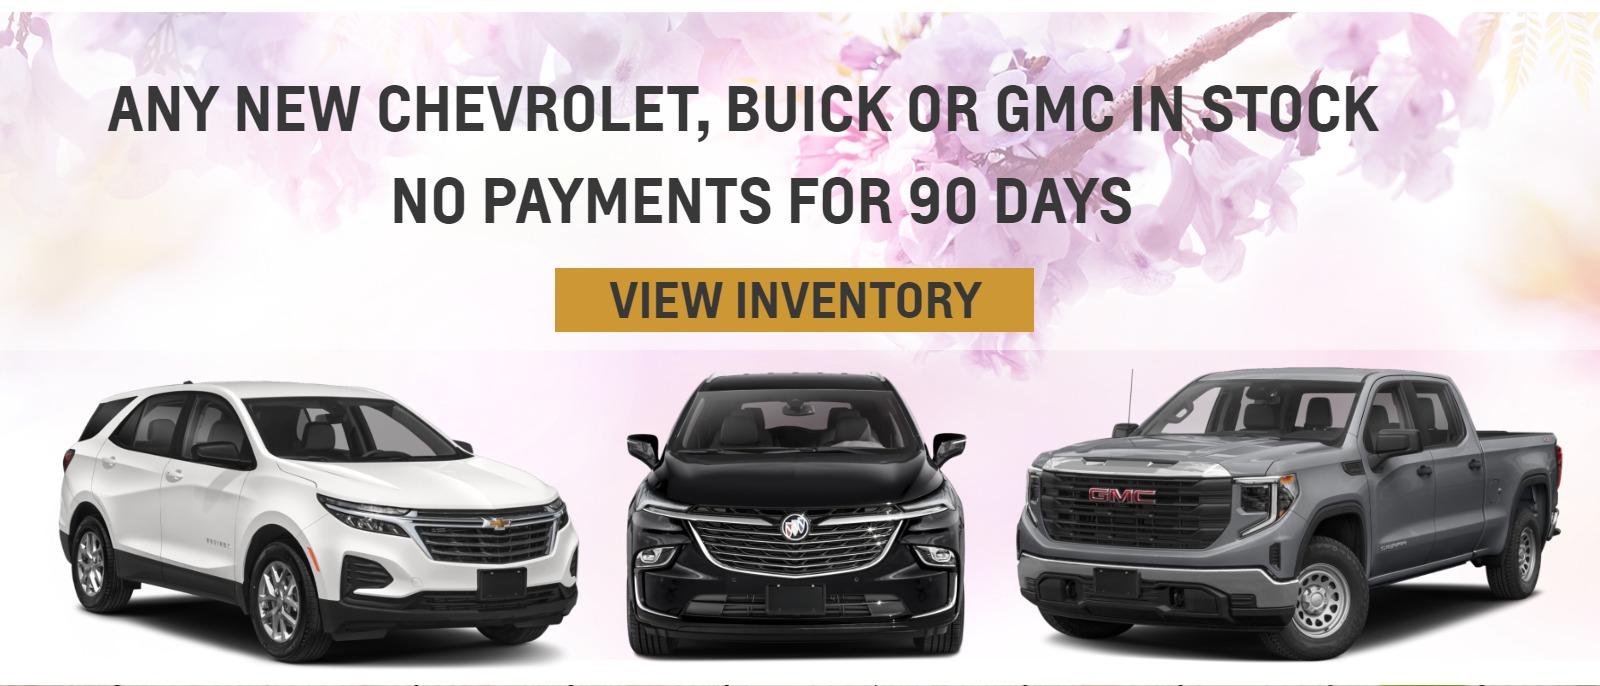 Any new Chevrolet, Buick or GMC in stock


No pymts for 90 days